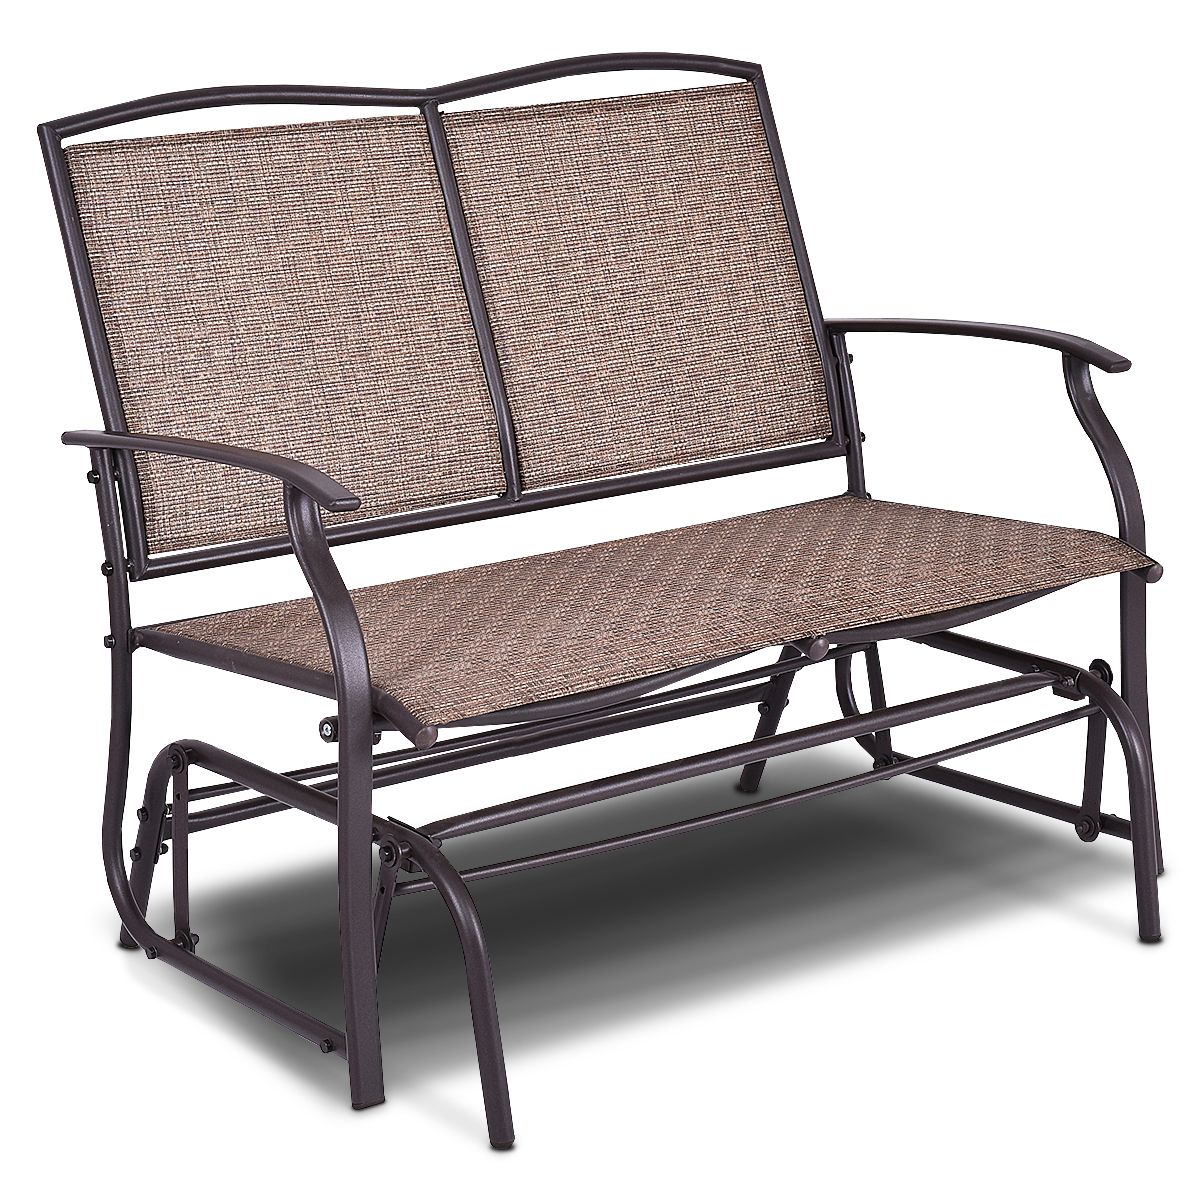 Costway Patio Glider Rocking Bench Double 2 Person Chair Pertaining To Double Glider Loveseats (View 20 of 25)